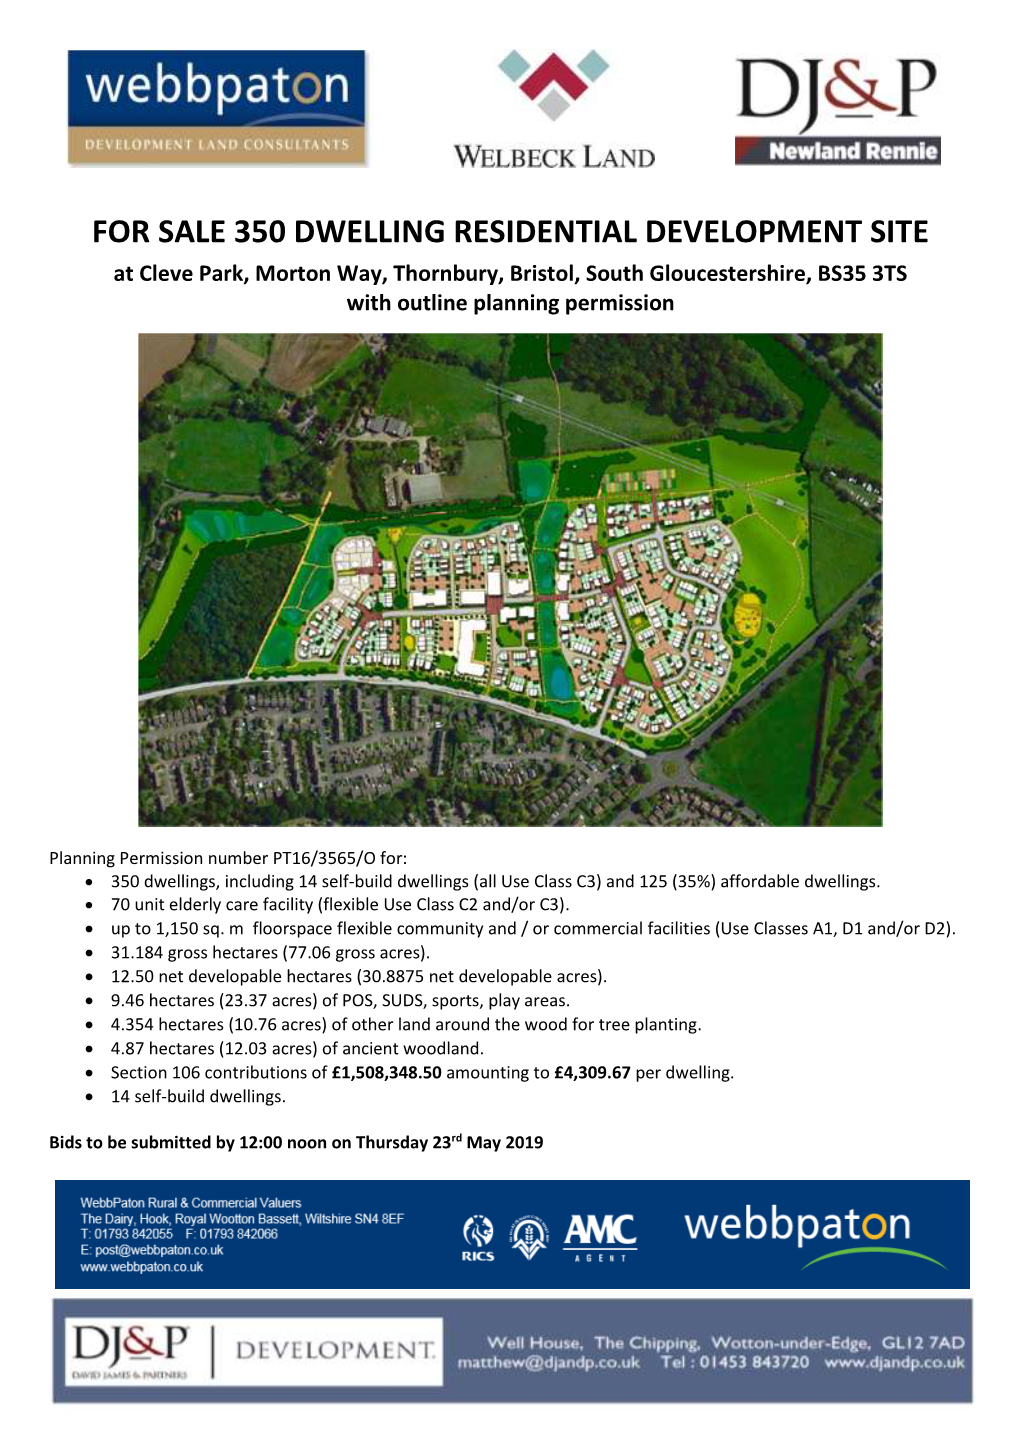 FOR SALE 350 DWELLING RESIDENTIAL DEVELOPMENT SITE at Cleve Park, Morton Way, Thornbury, Bristol, South Gloucestershire, BS35 3TS with Outline Planning Permission